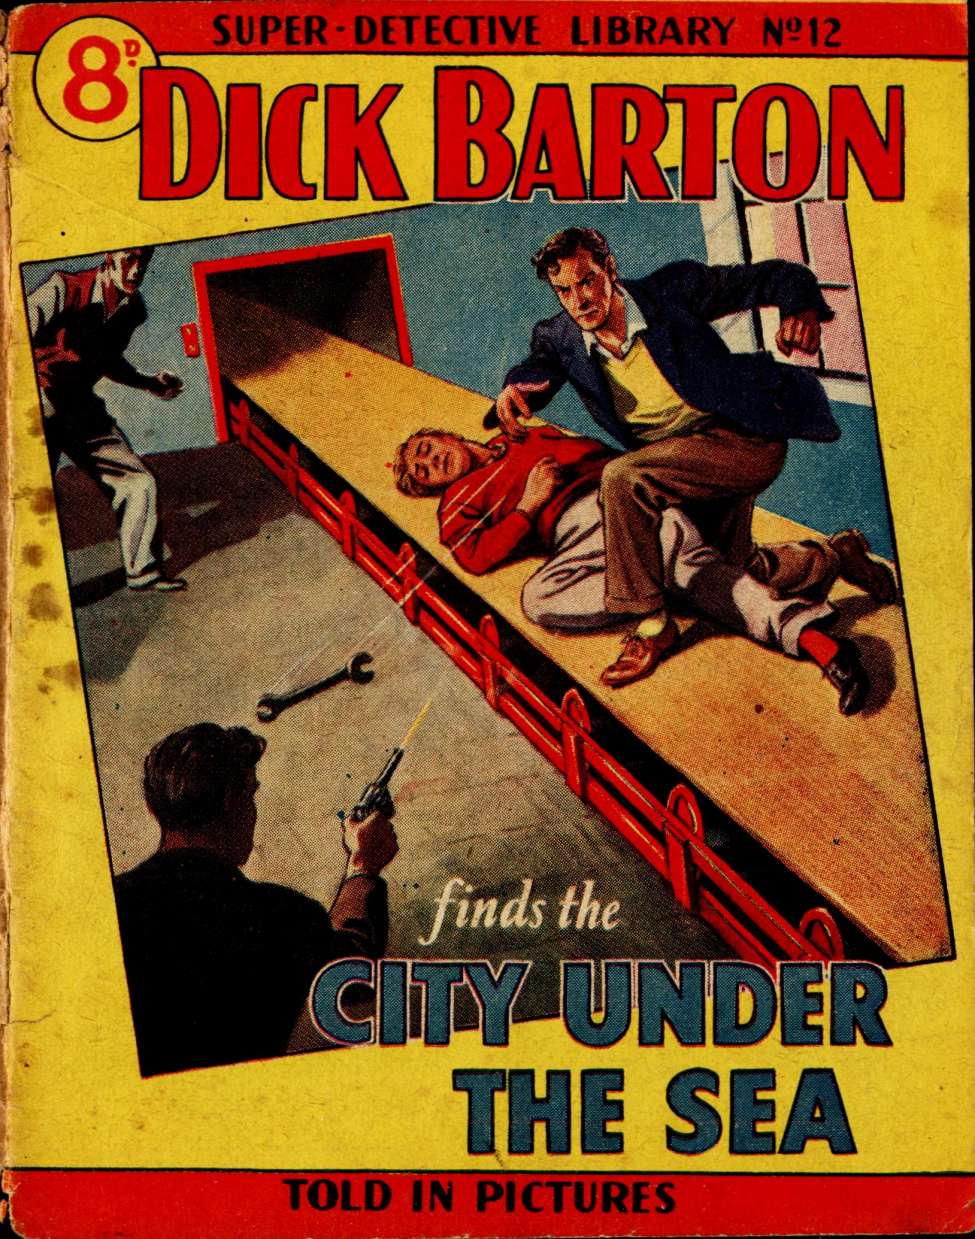 Comic Book Cover For Super Detective Library 12 - Dick Barton finds the City Under The Sea